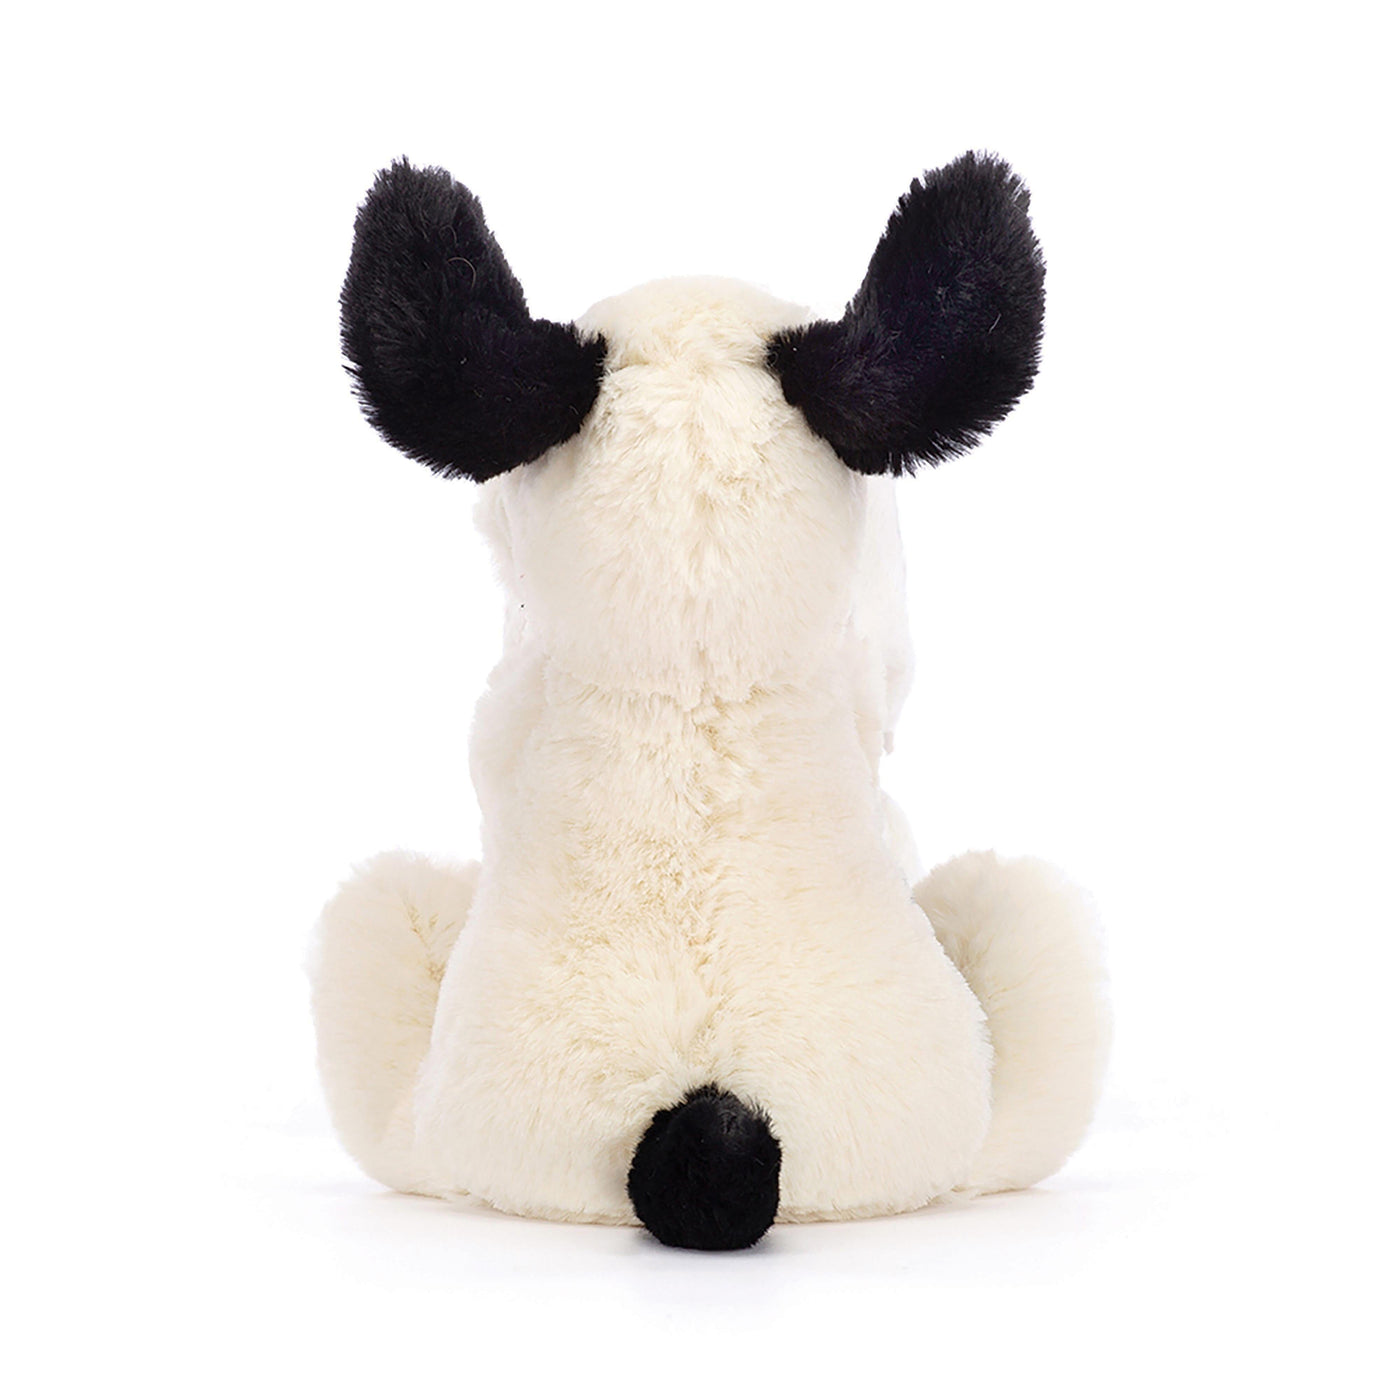 Jellycat Black & Cream Puppy Soother Soother Jellycat 